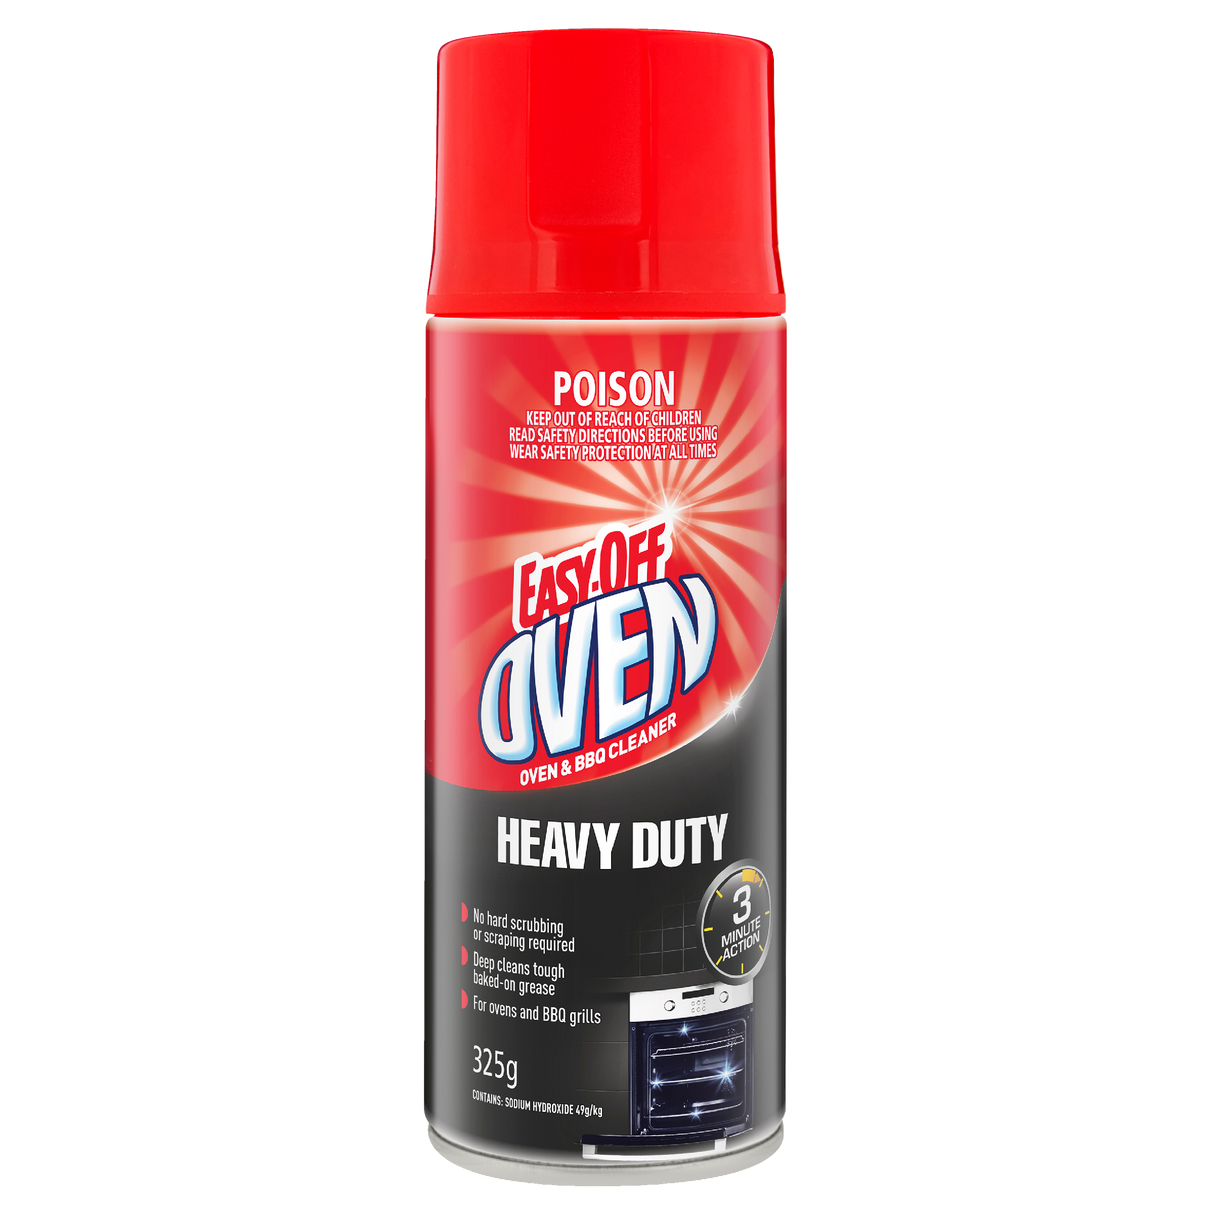 Easy-Off Heavy Duty Oven & BBQ Cleaner 325g